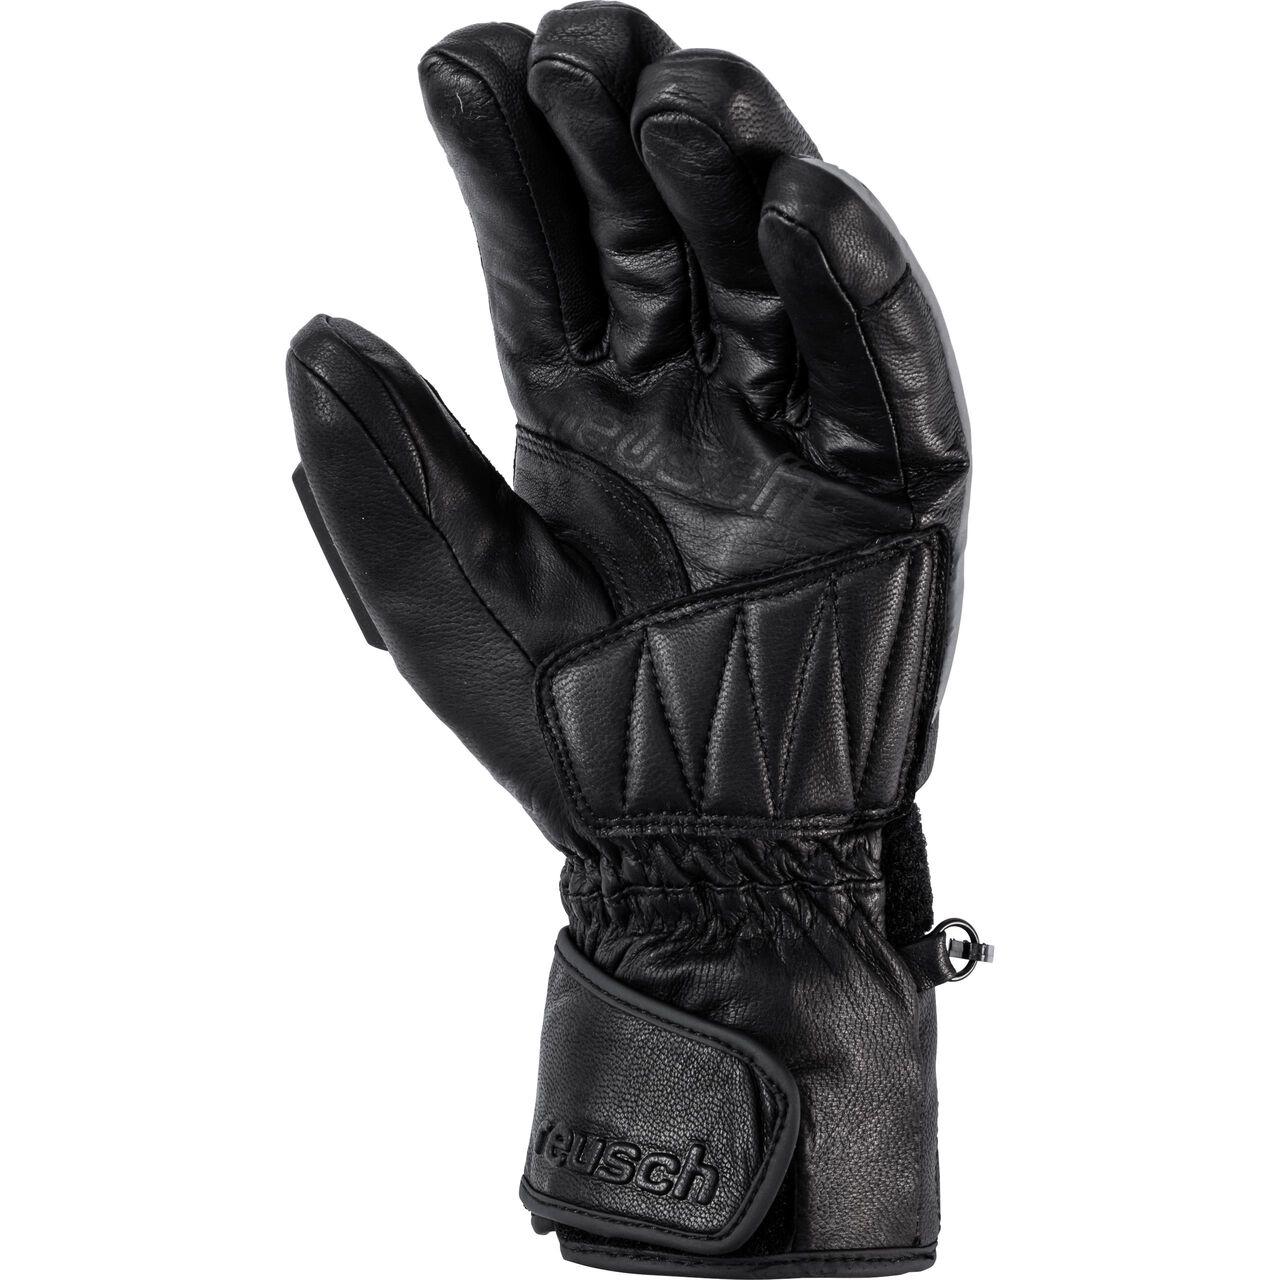 Winter touring leather glove 1.0 black